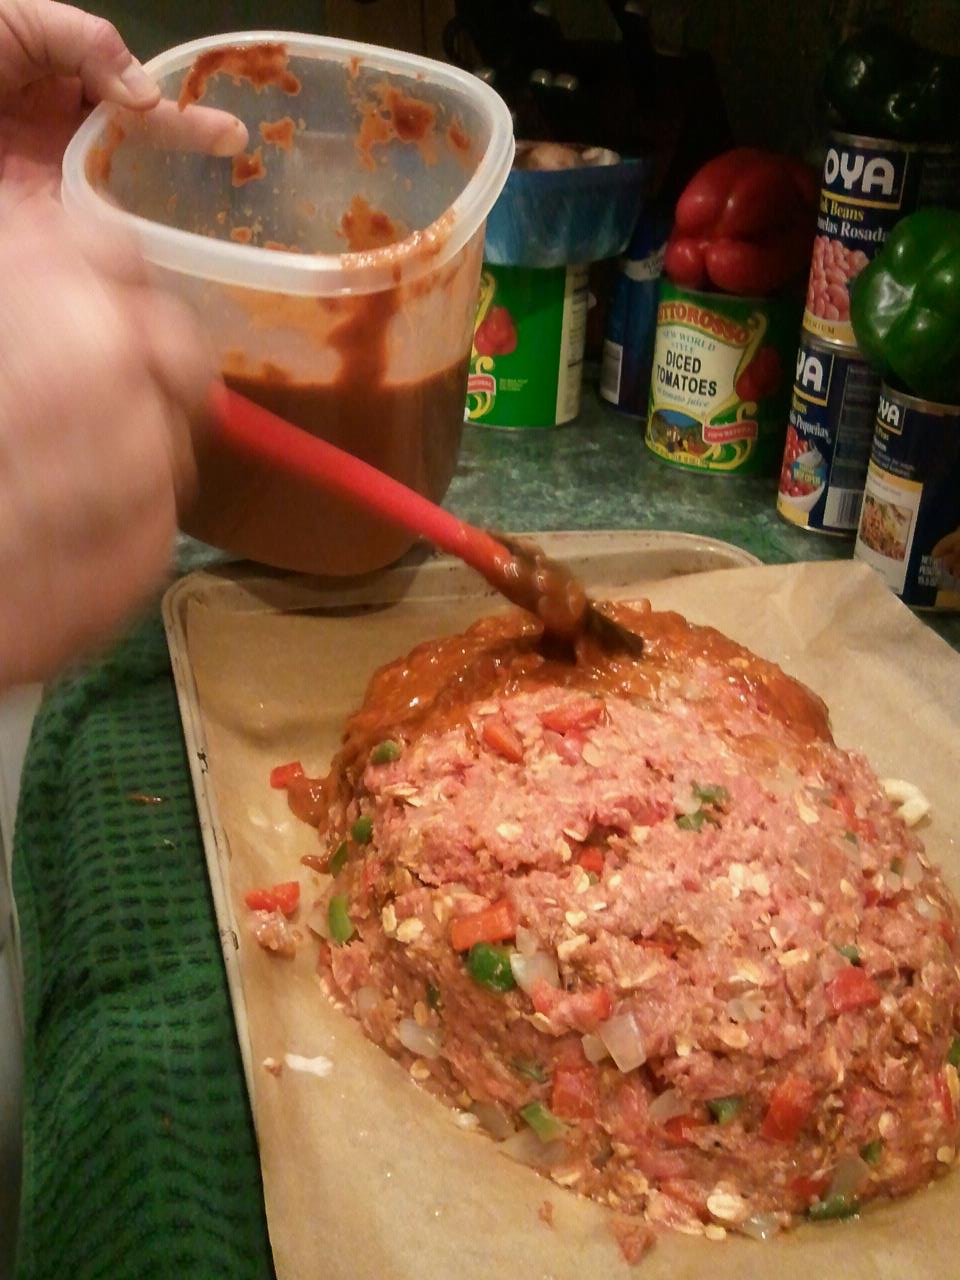 Saucing the Meatloaf